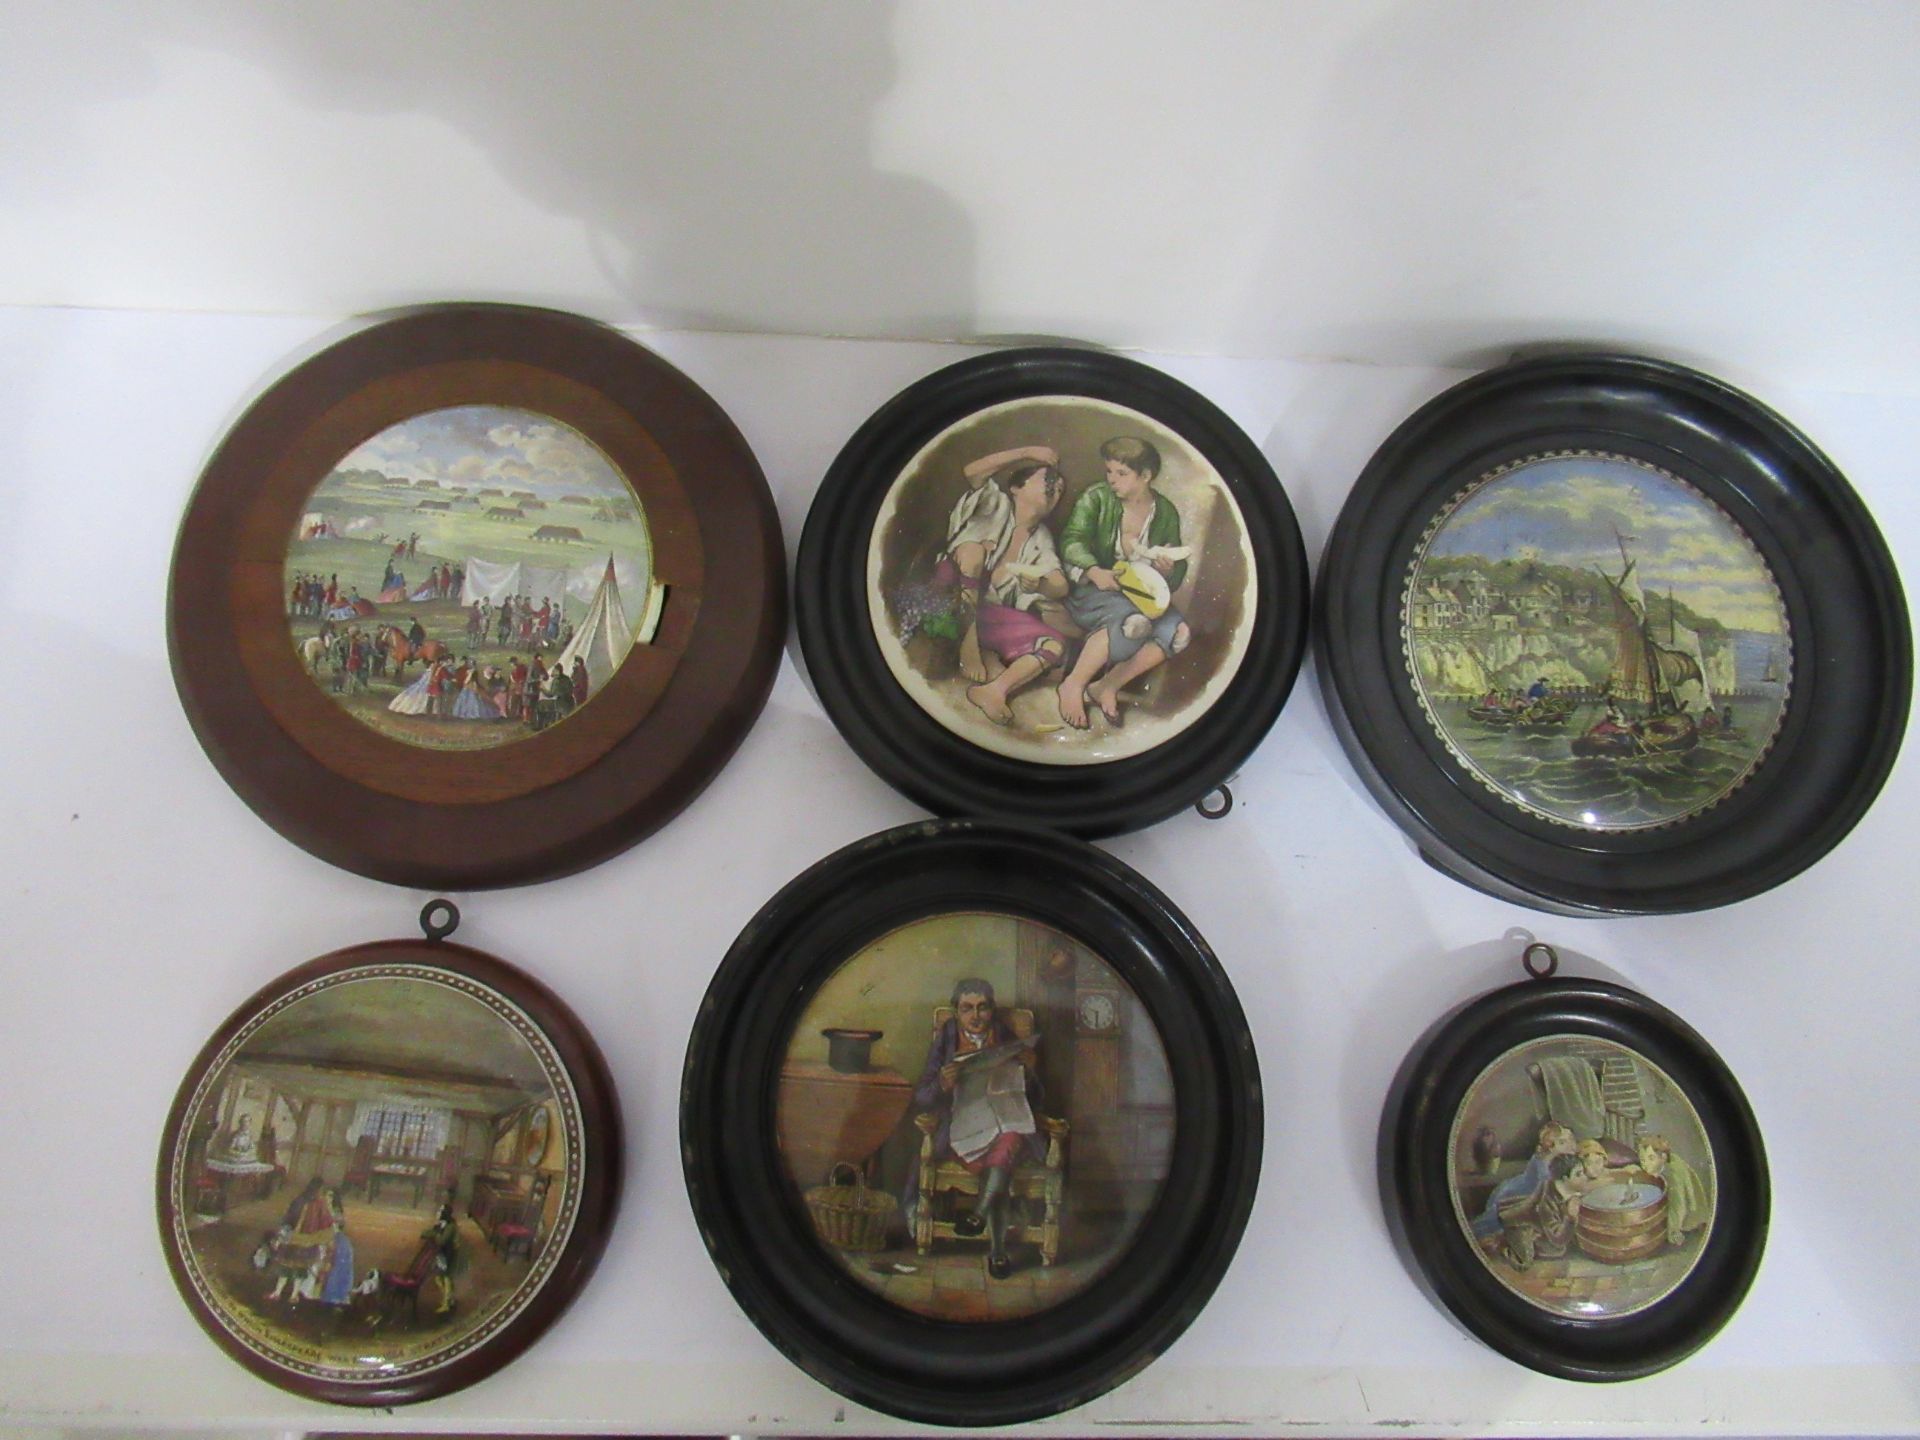 6x Prattware ceramic lids in wooden mounts including 'Pegwell Bay', 'Rifle Contest Wimbledon 1868',